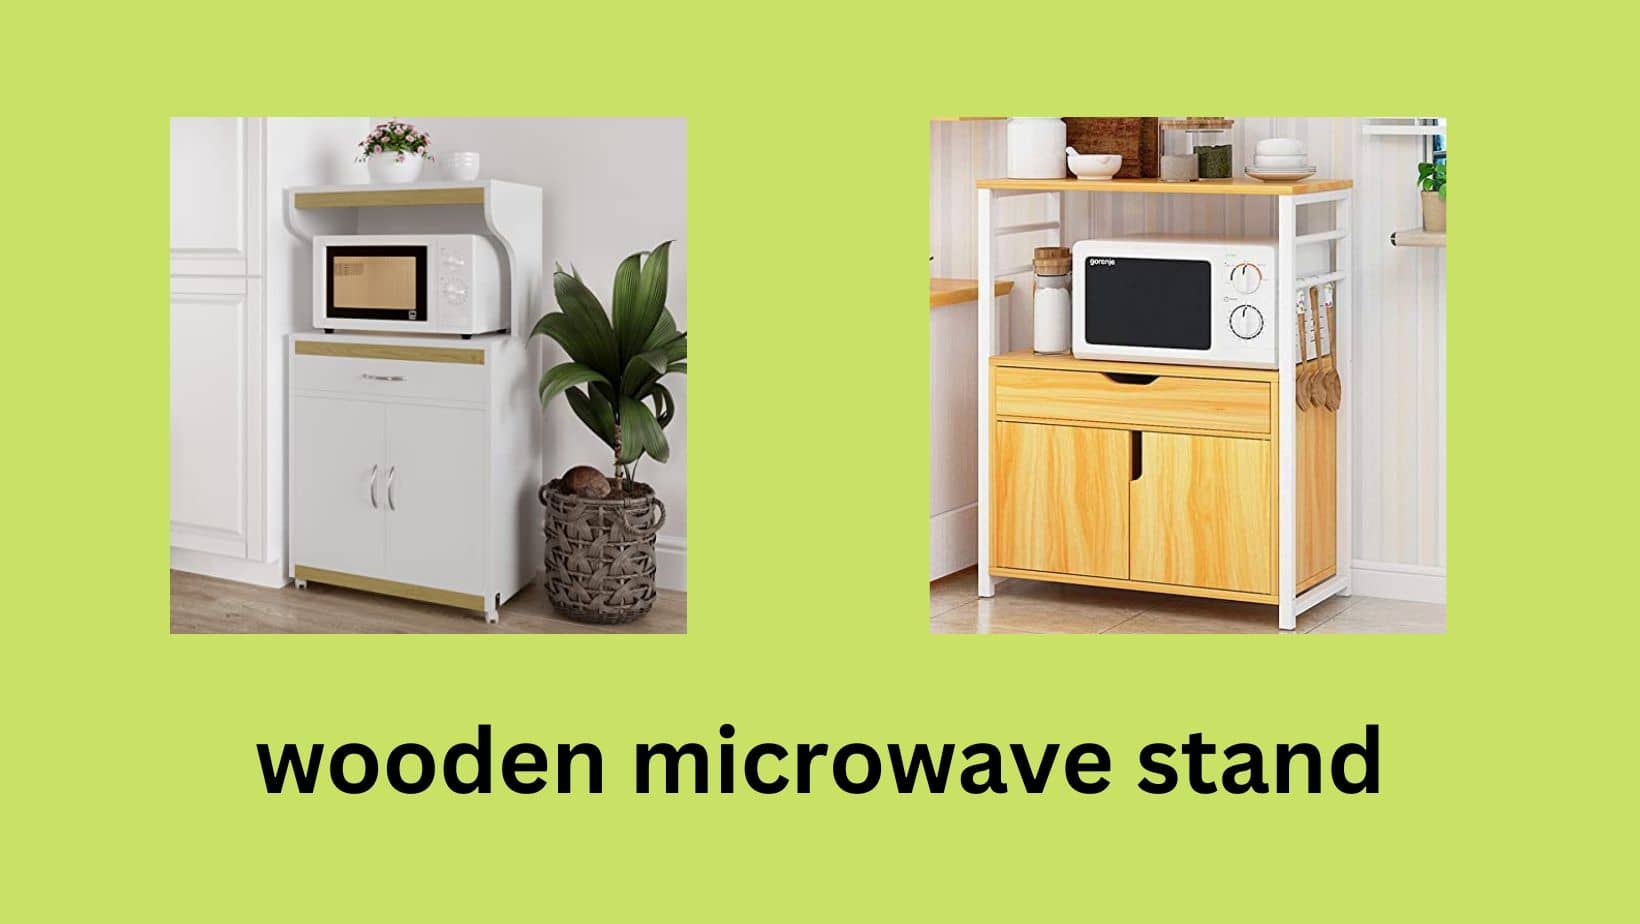 10 Best Wooden Microwave Stands (Reviews)